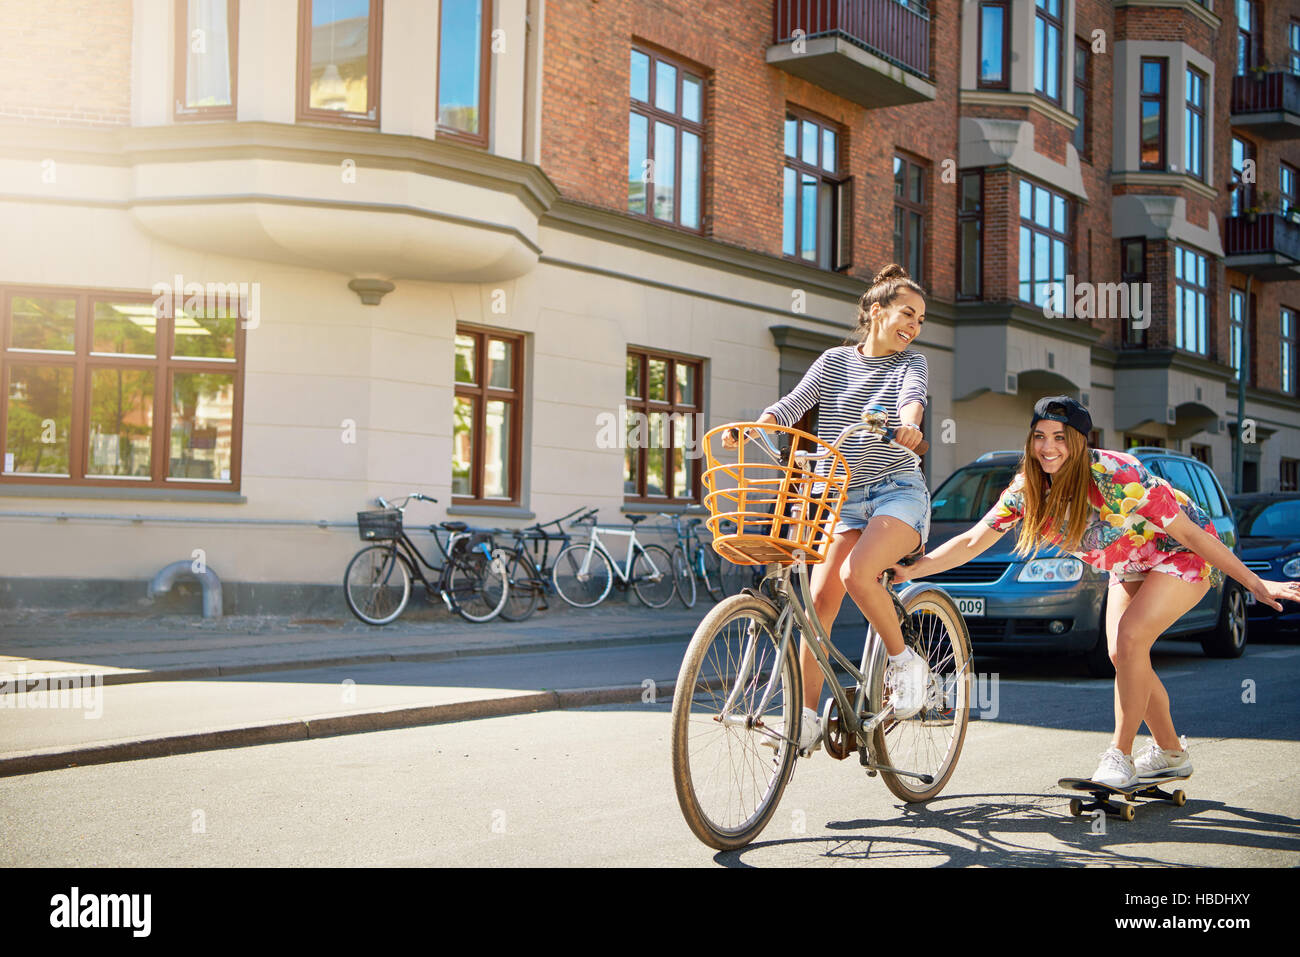 Cute laughing young woman in jeans shorts on bike with basket pulling girl in tie die shirt and black hat holding on while using skateboard Stock Photo